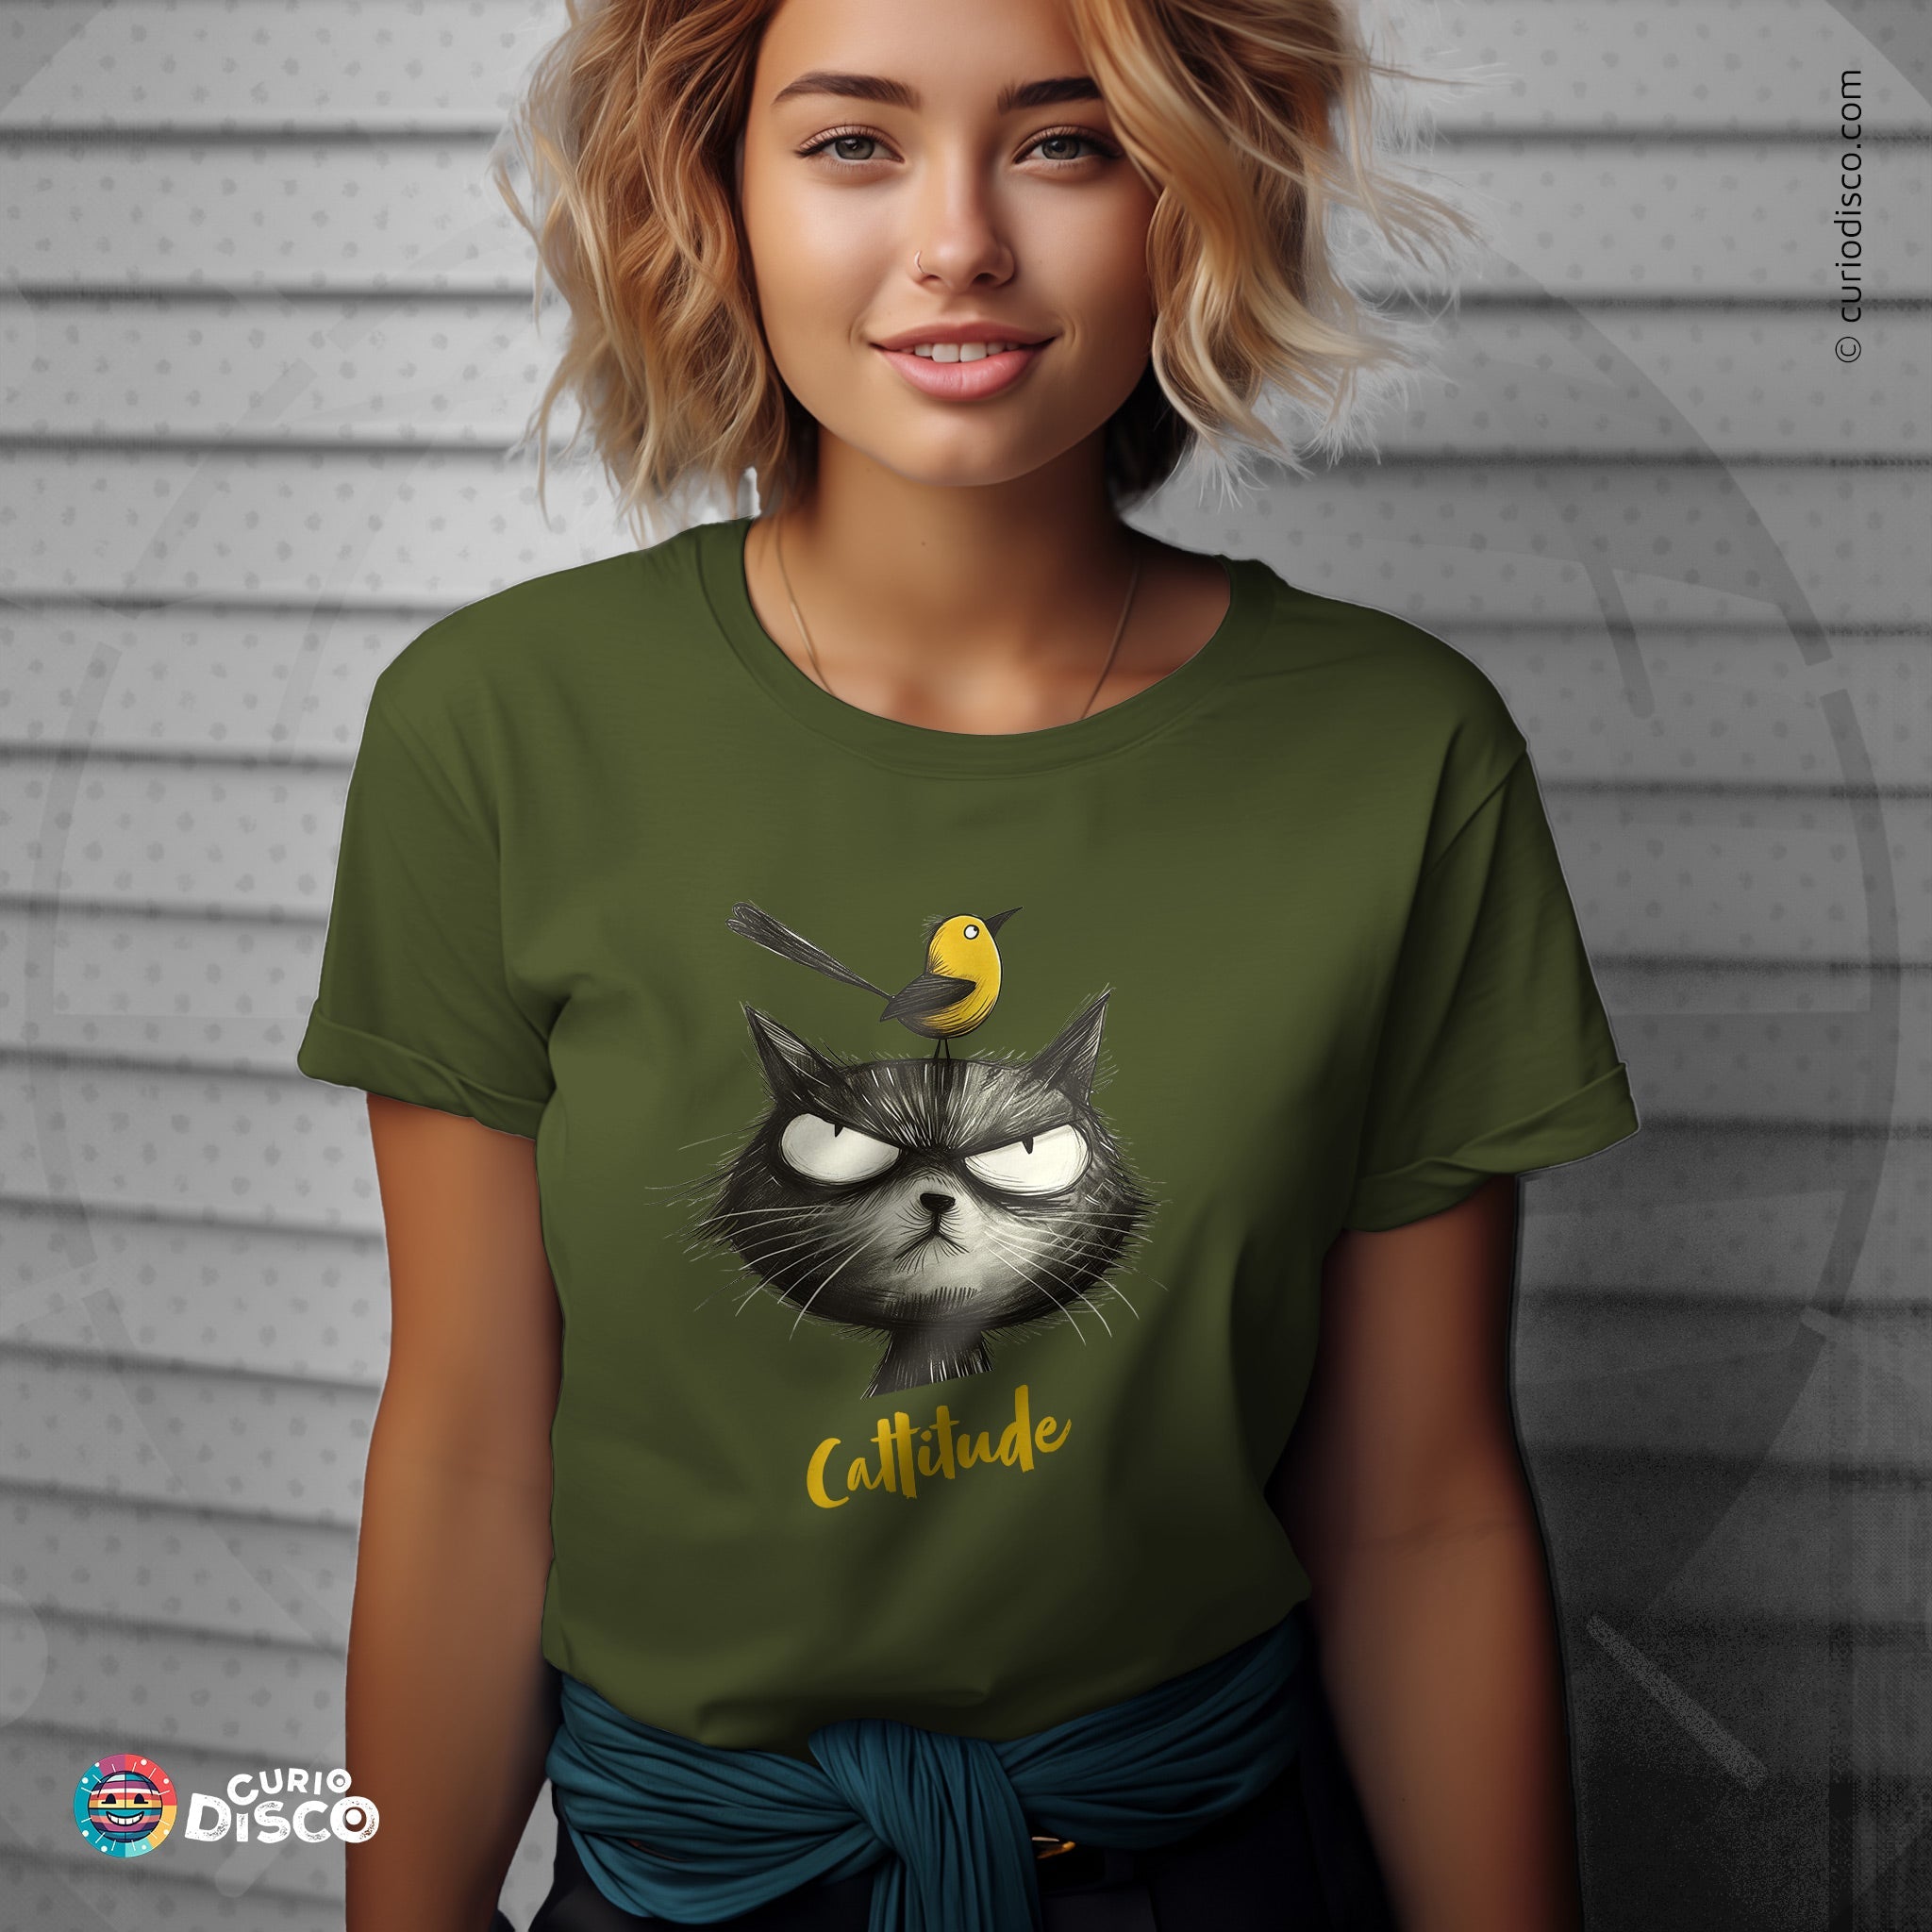 Olive green, short sleeve t-shirt, a funny cat shirt and ironic shirt blend, great as gifts for girlfriend, cat lover gift, and meme shirt. Cat yoga, treat yourself, gifts for cat lovers and cat people. Custom pet shirt in plus size.